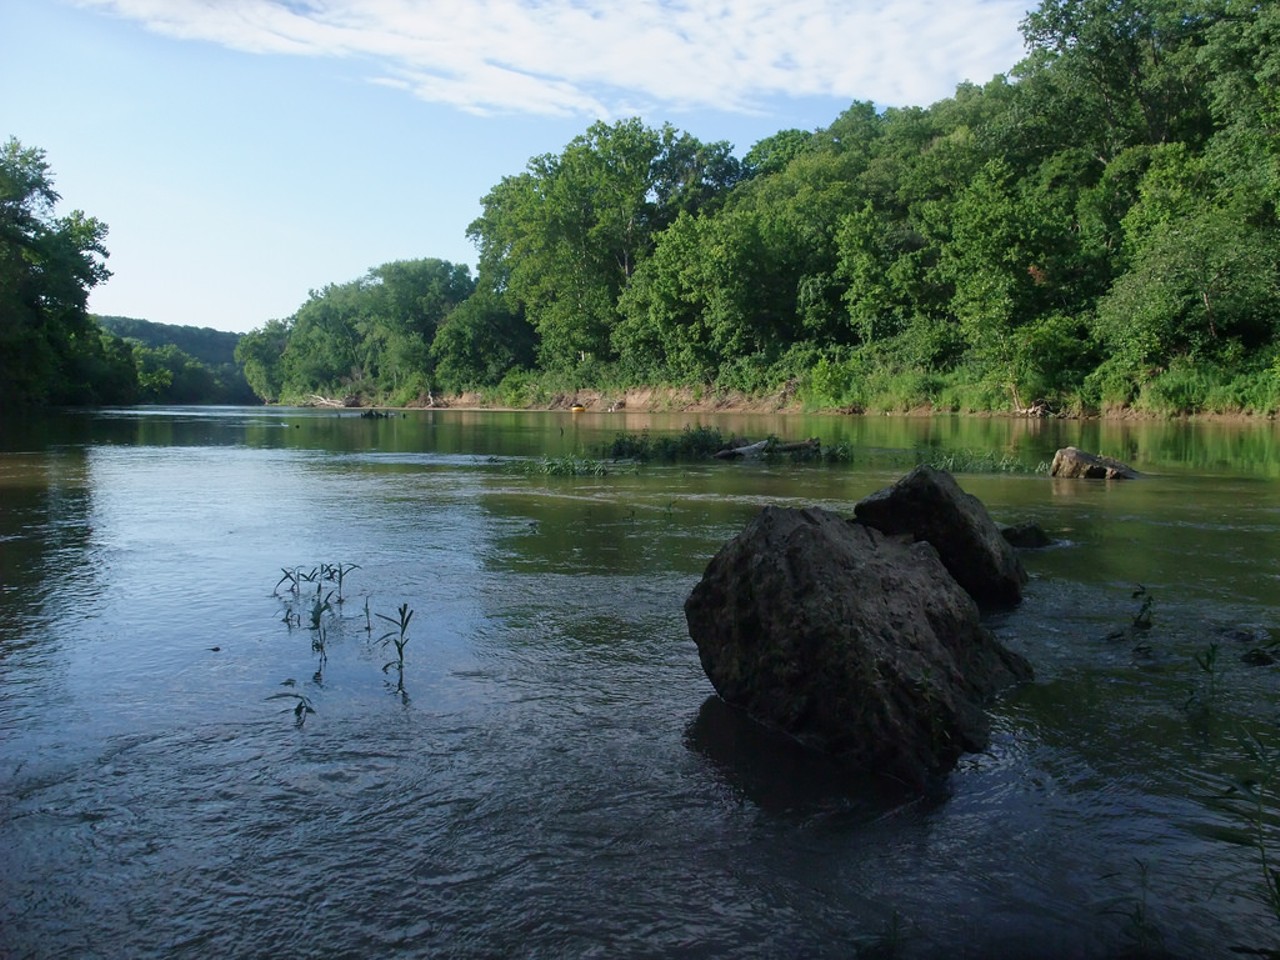 Meramec State Park
670 Fisher Cave Drive 
Sullivan, MO 63080
(573) 468-6072
Estimated drive time: 1 hour, 17 minutes. Directions here.
If a float trip is calling your name, Meramec River State Park just might be your place. The Meramec River is great for many water activities, including fishing, boating, swimming and rafting. If you want to extend your trip, Meramec River State Park also boasts a campground, cabins and a hotel.